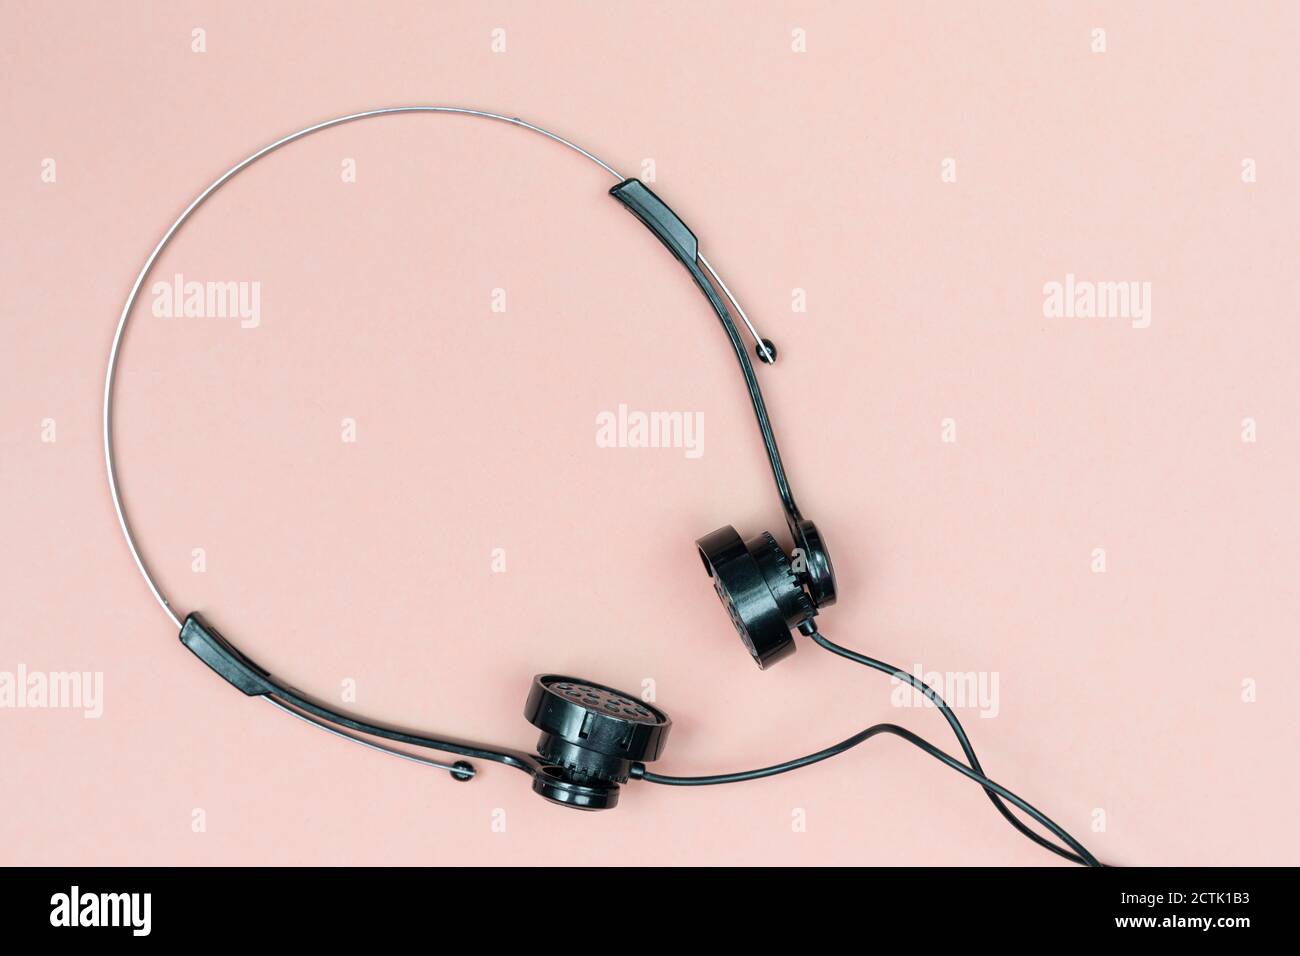 Retro headphones without foam in high angle view Stock Photo